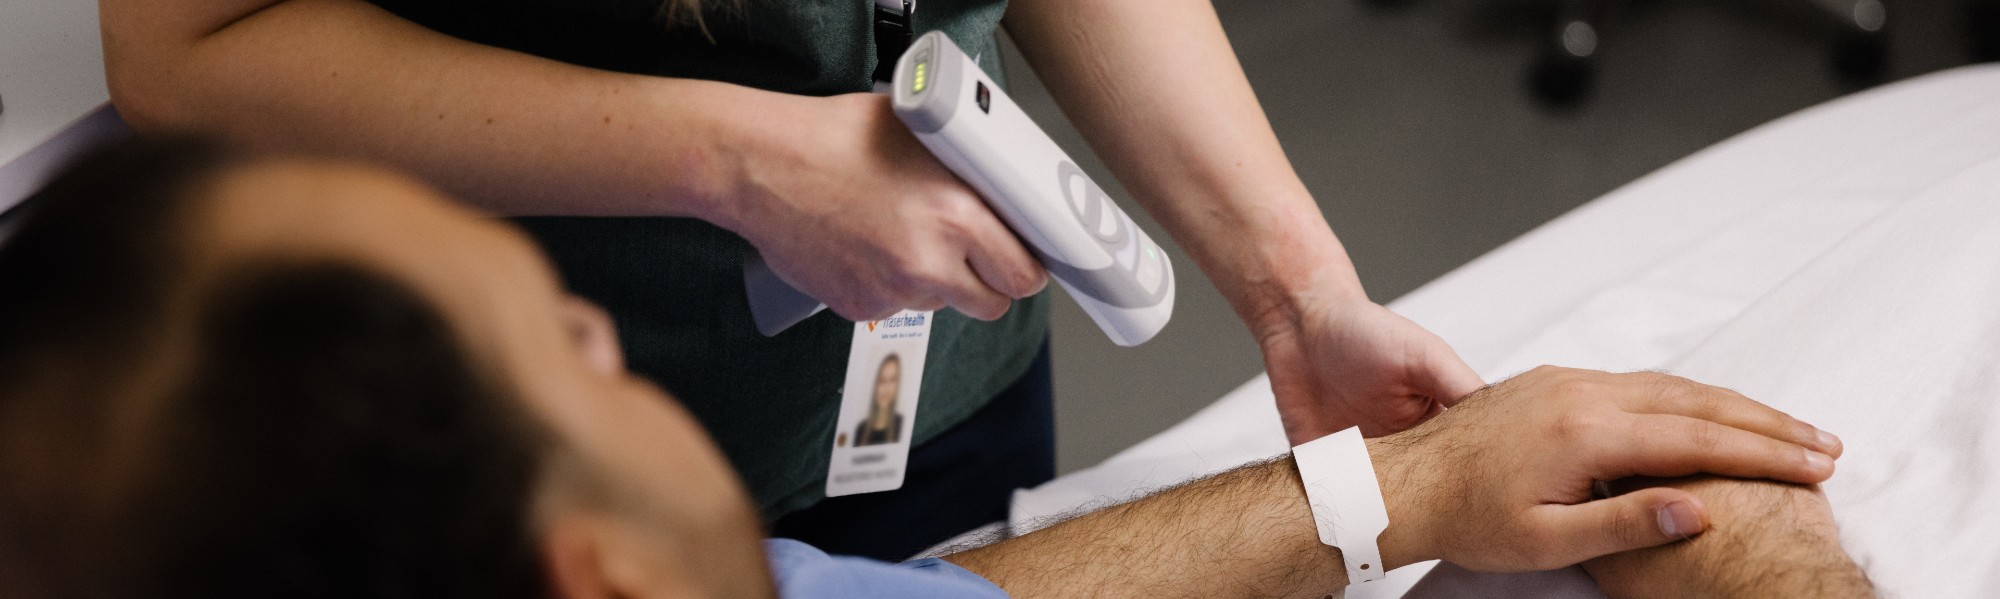 nurse uses a scanner on patient wristband